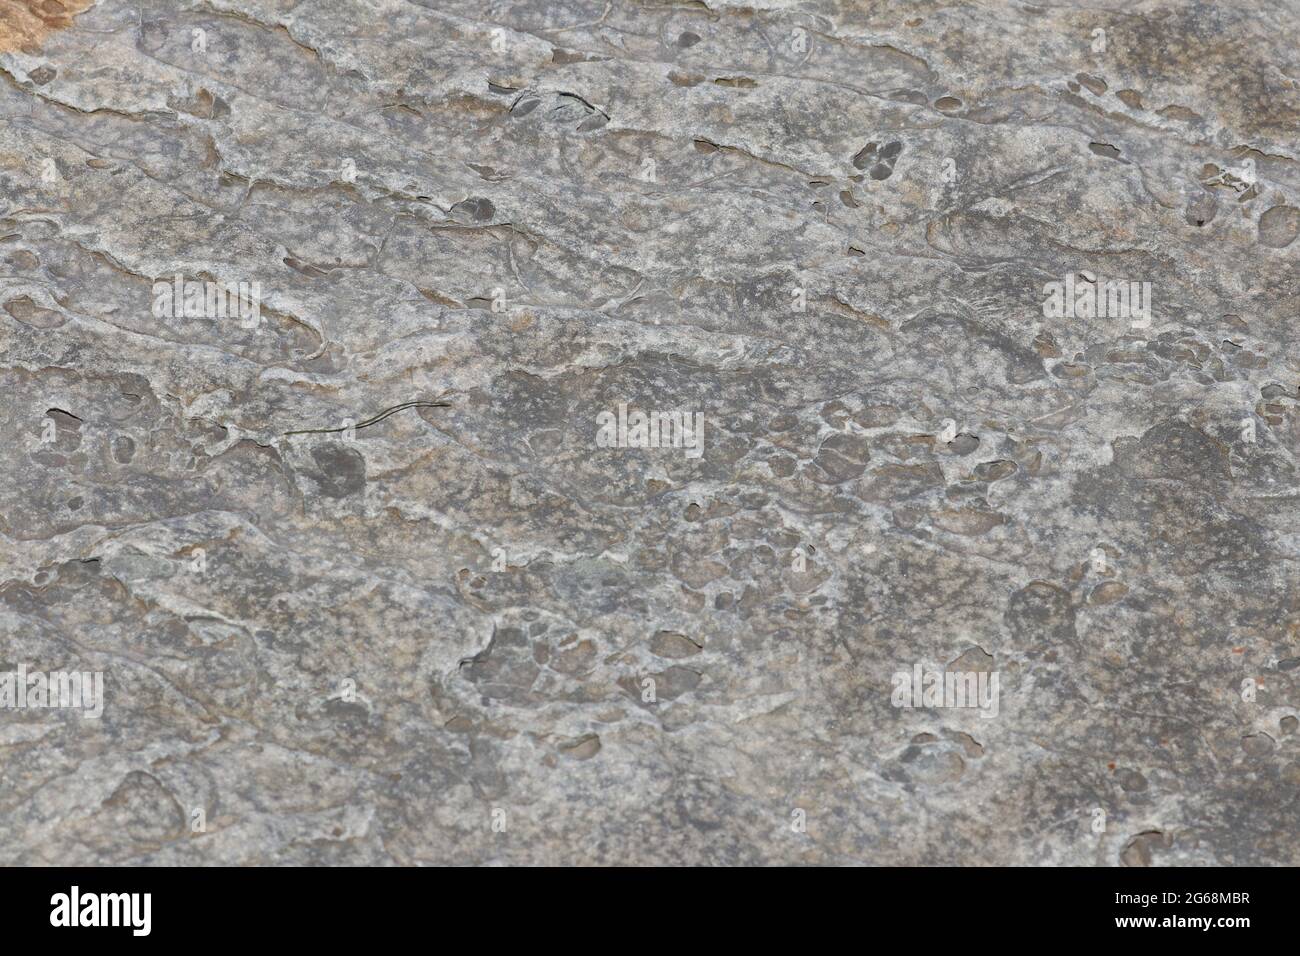 Abstract textured background of close up shale rock formation Stock Photo